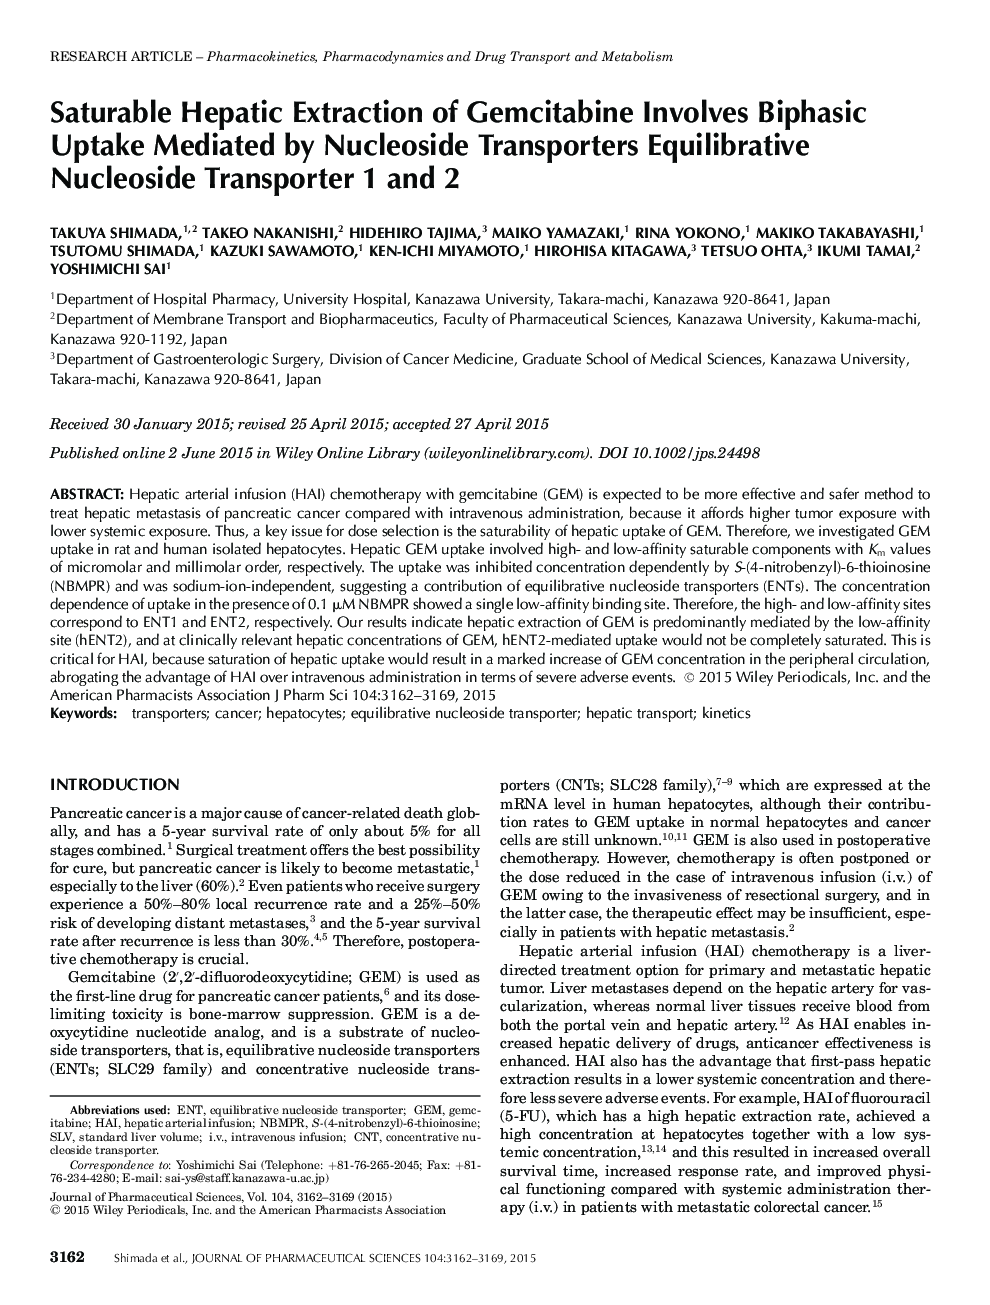 Saturable Hepatic Extraction of Gemcitabine Involves Biphasic Uptake Mediated by Nucleoside Transporters Equilibrative Nucleoside Transporter 1 and 2